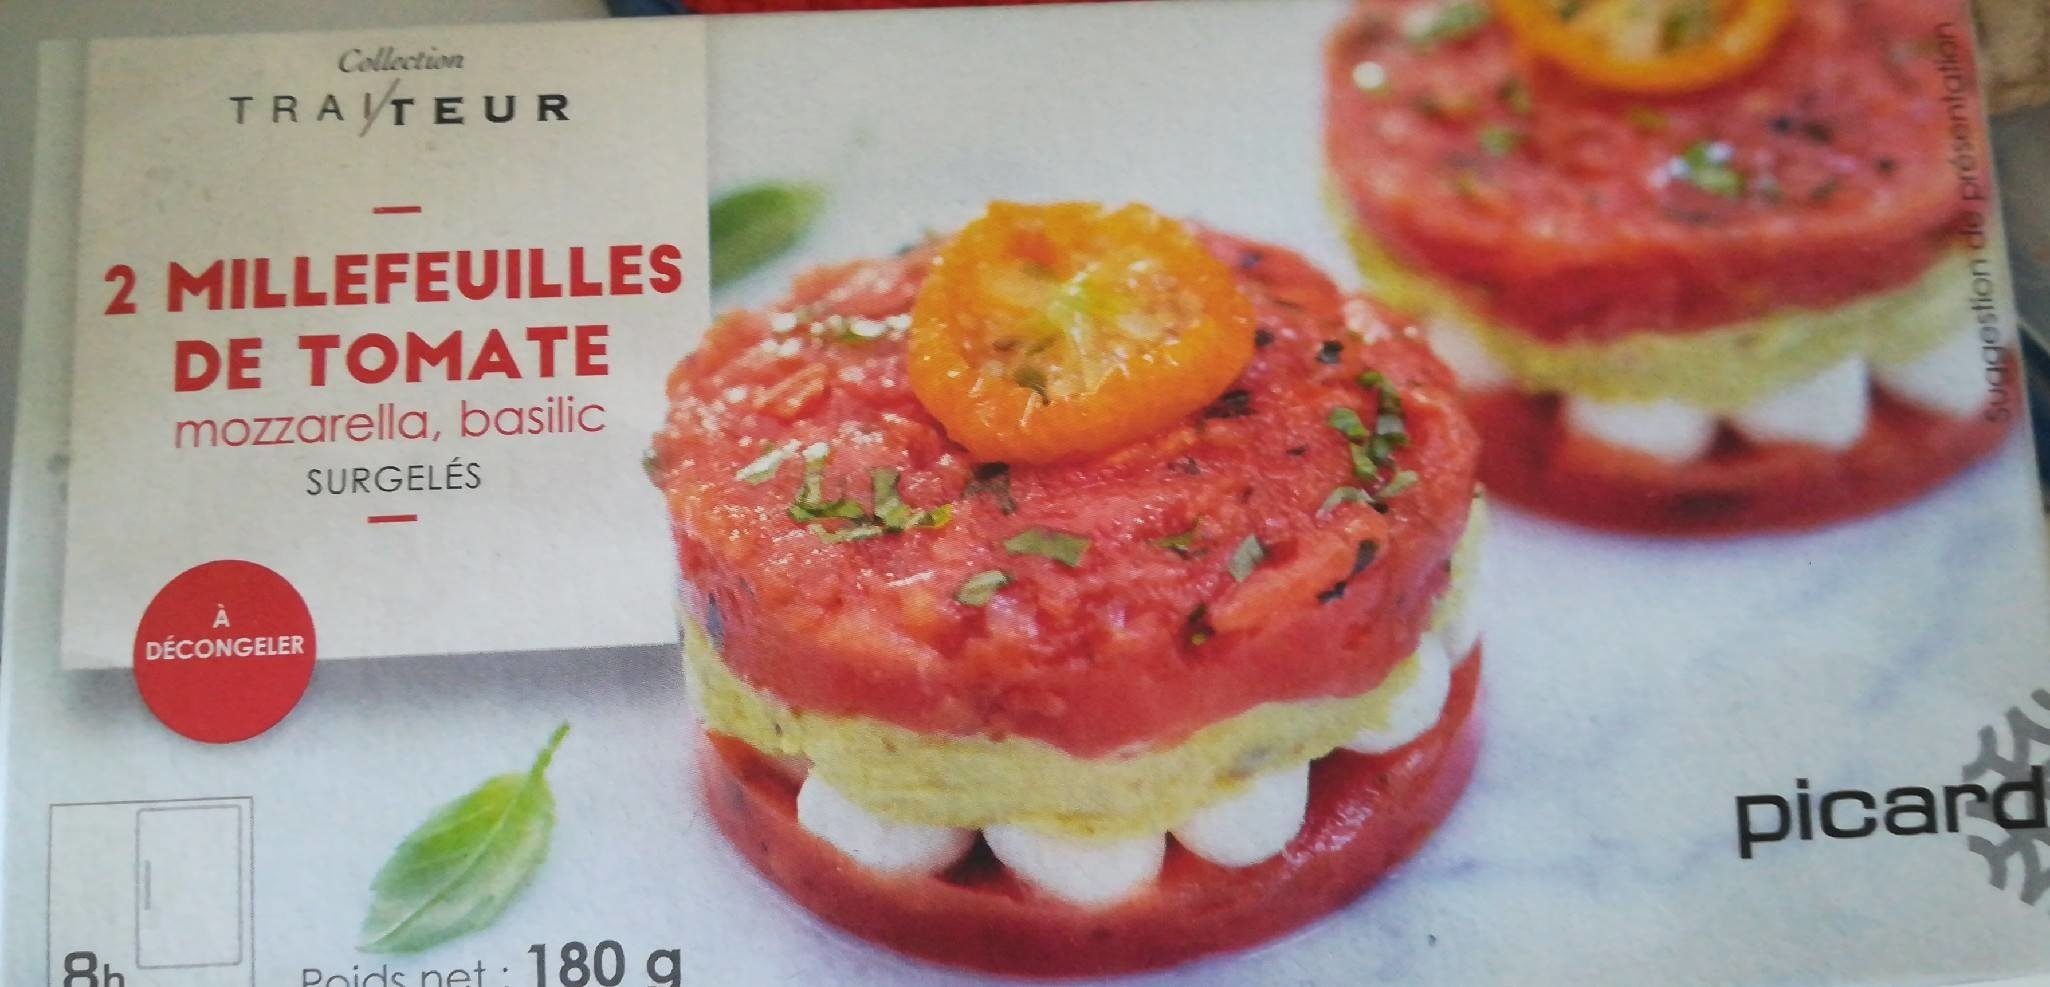 Millefeuille de tomate - Product - fr